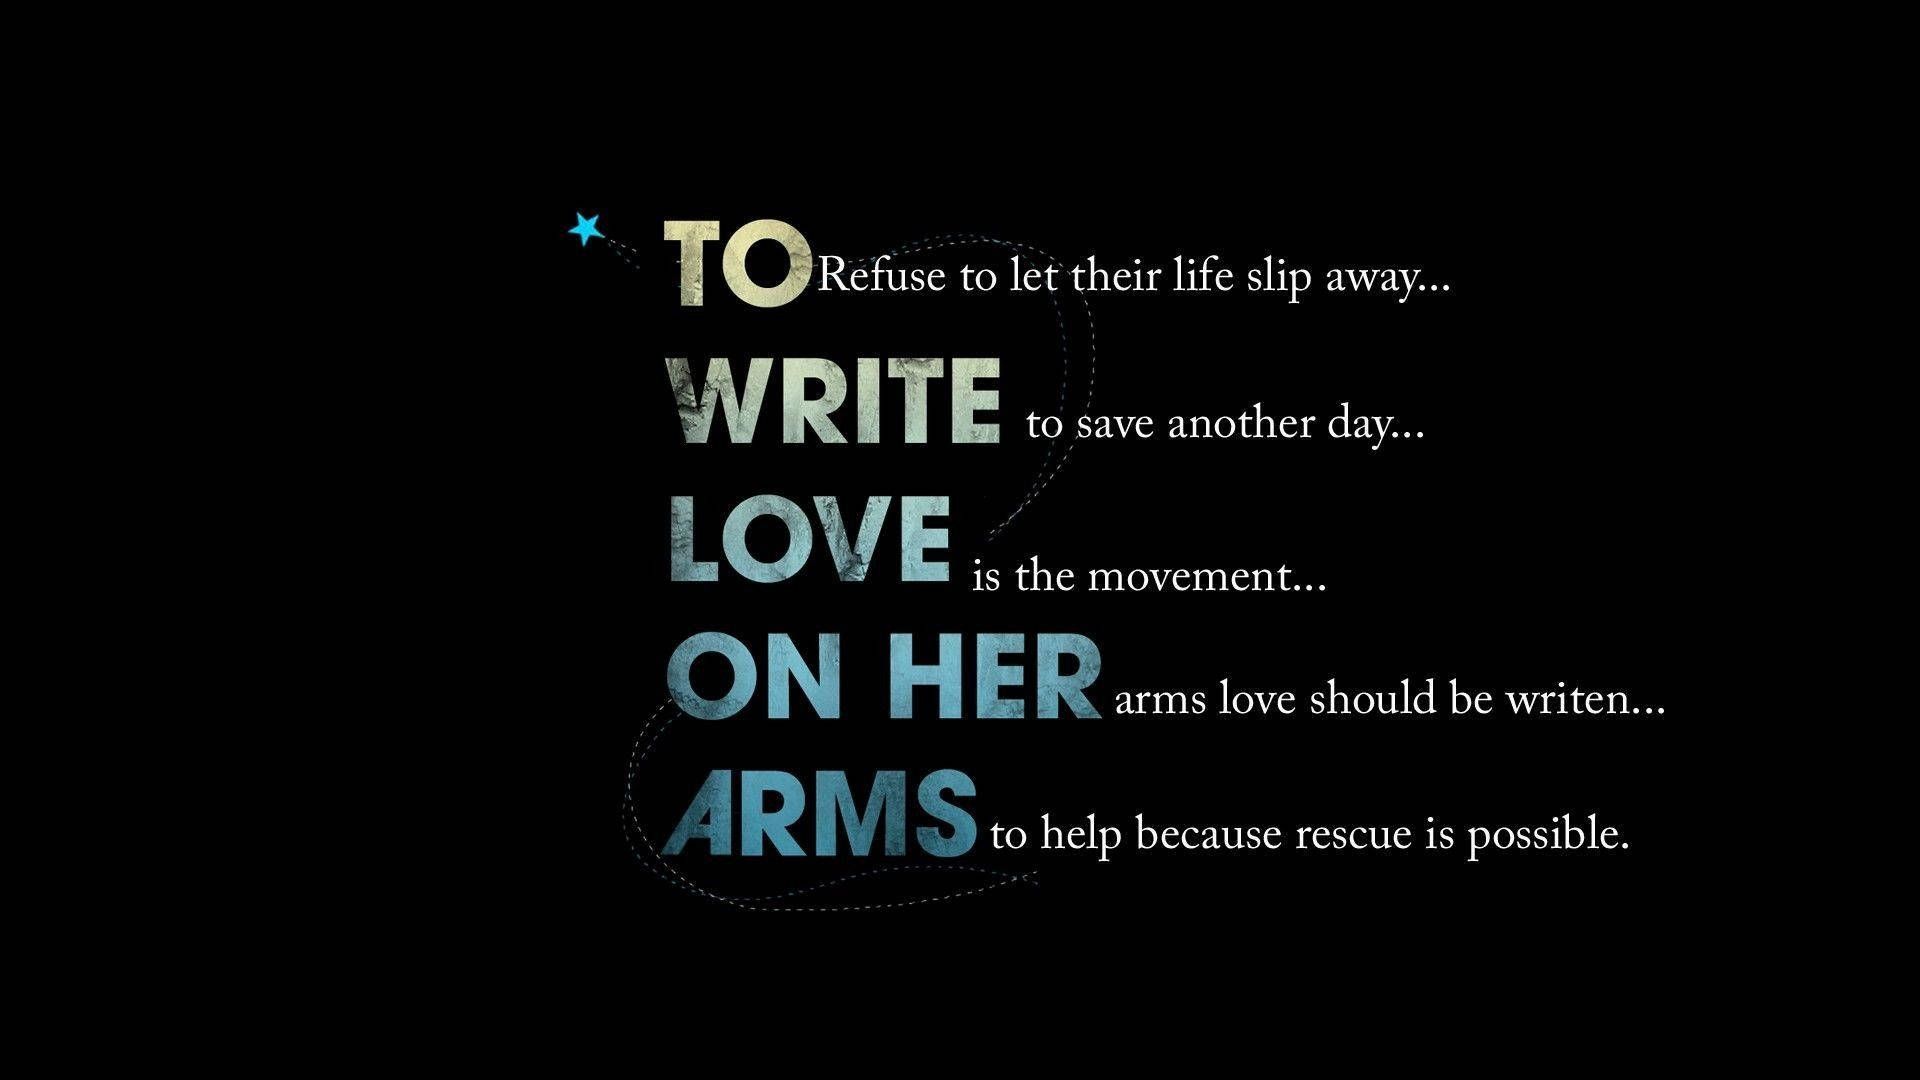 To write love on her arms - Sad quotes